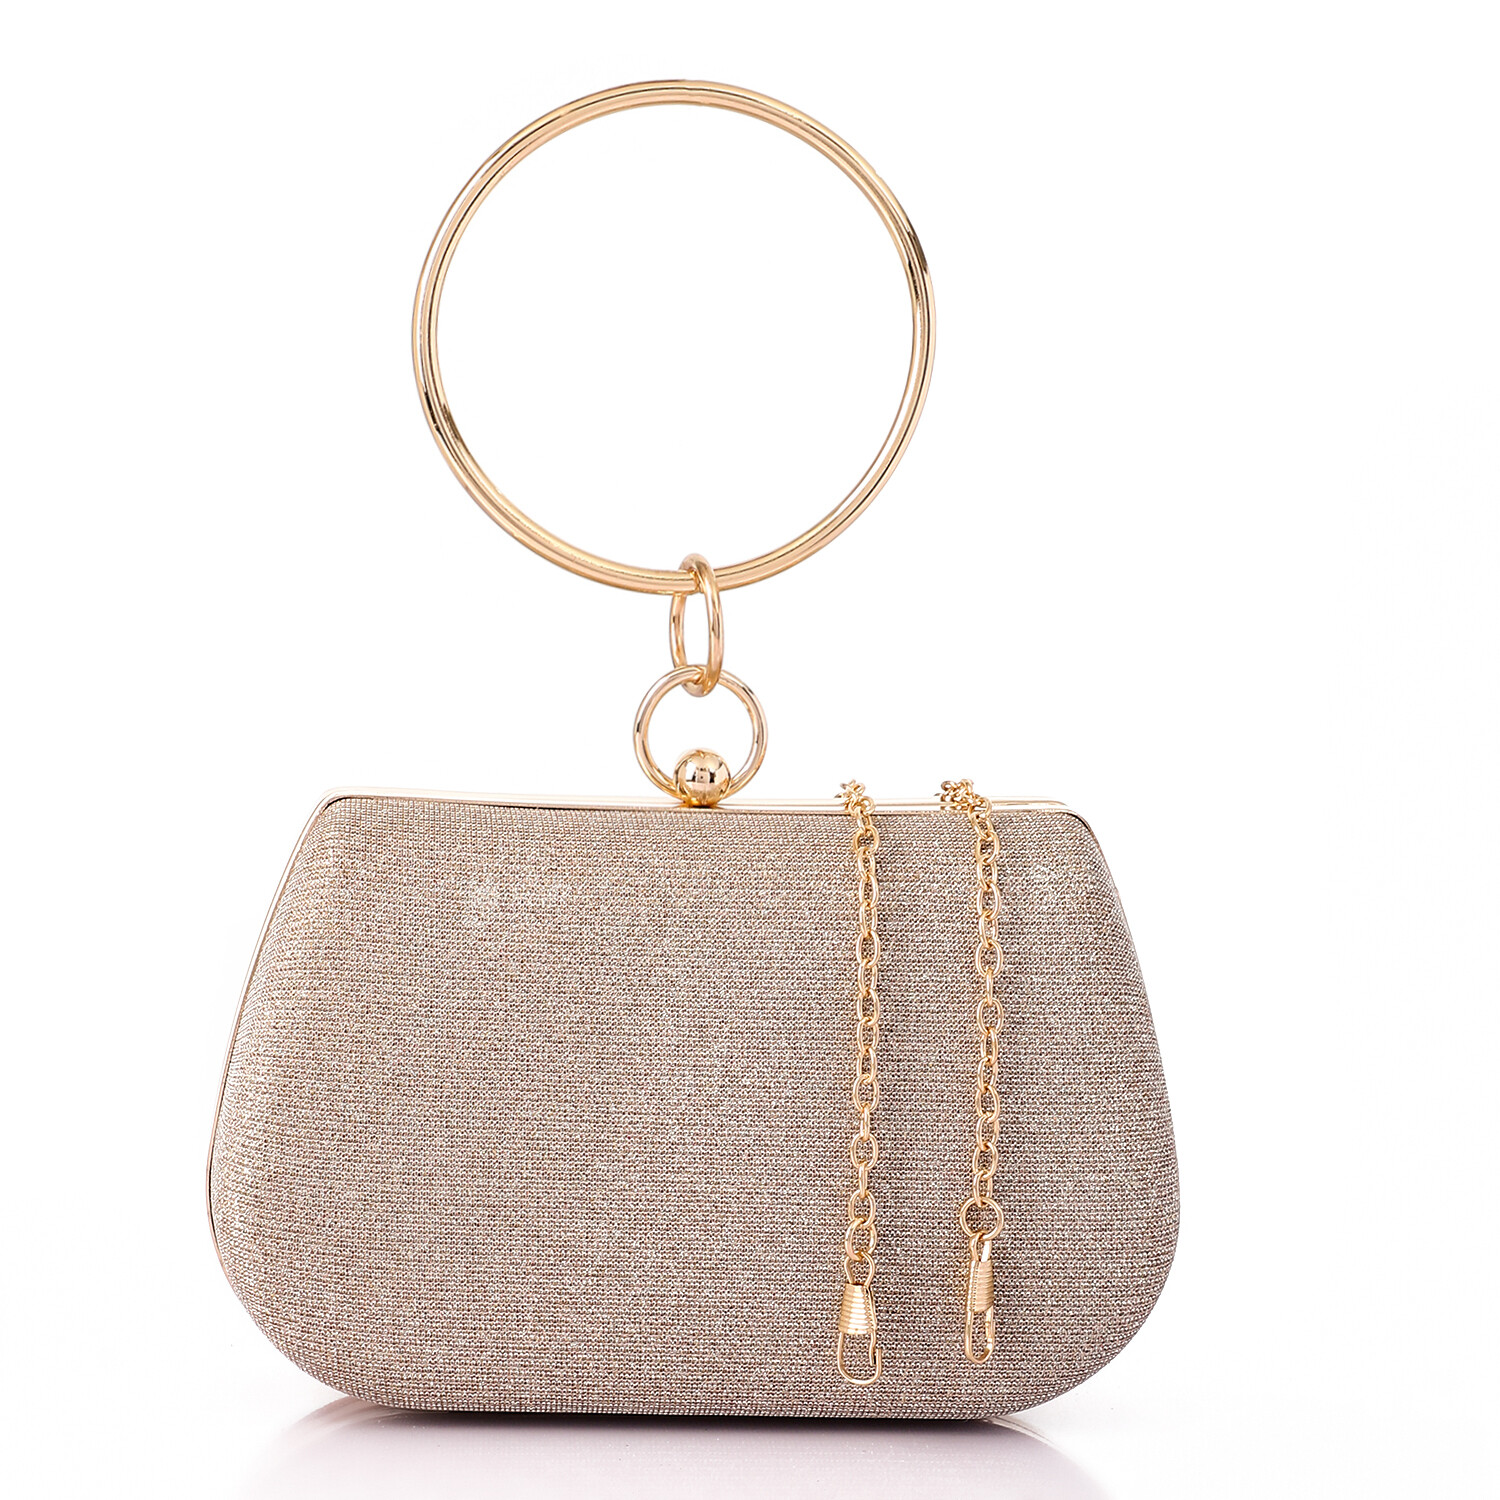 Glittery Champagne Clutch with Decorative Cicular Handle-4941